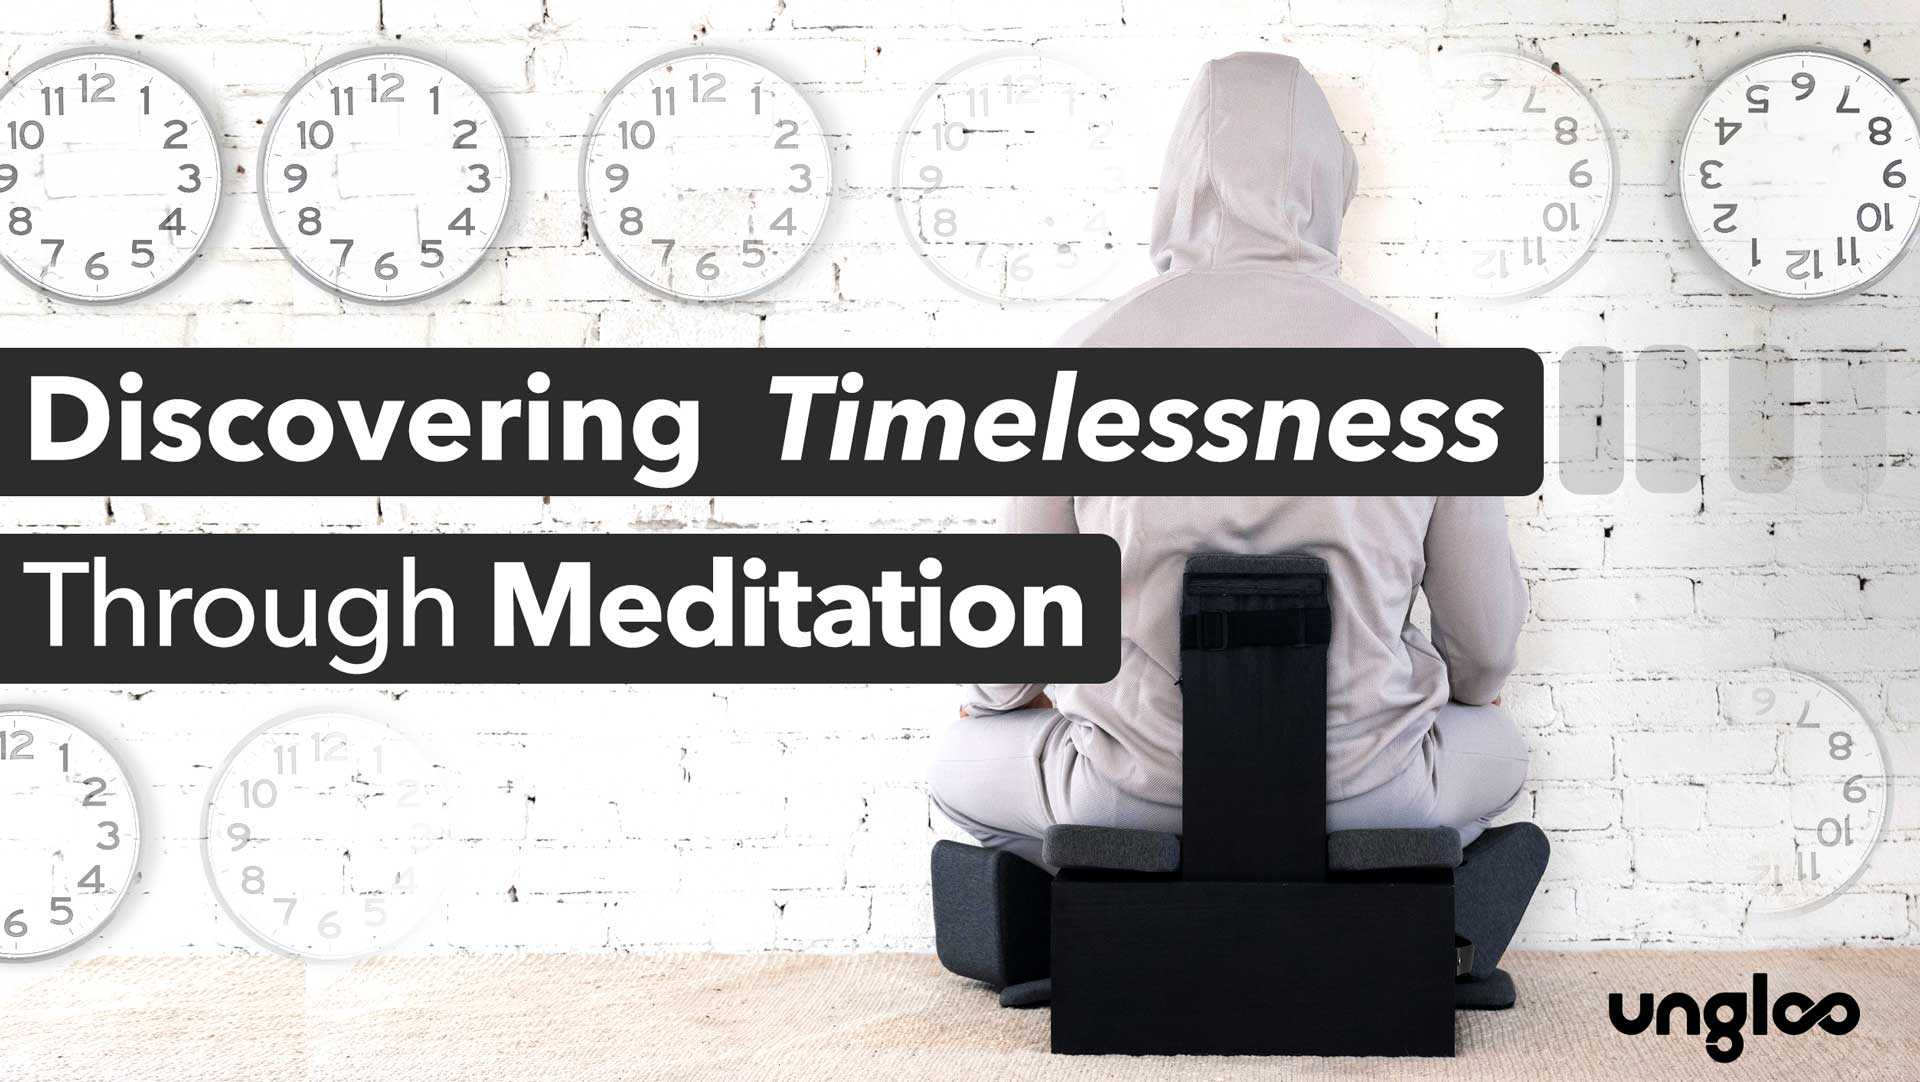 Discovering Timelessness Through Meditation